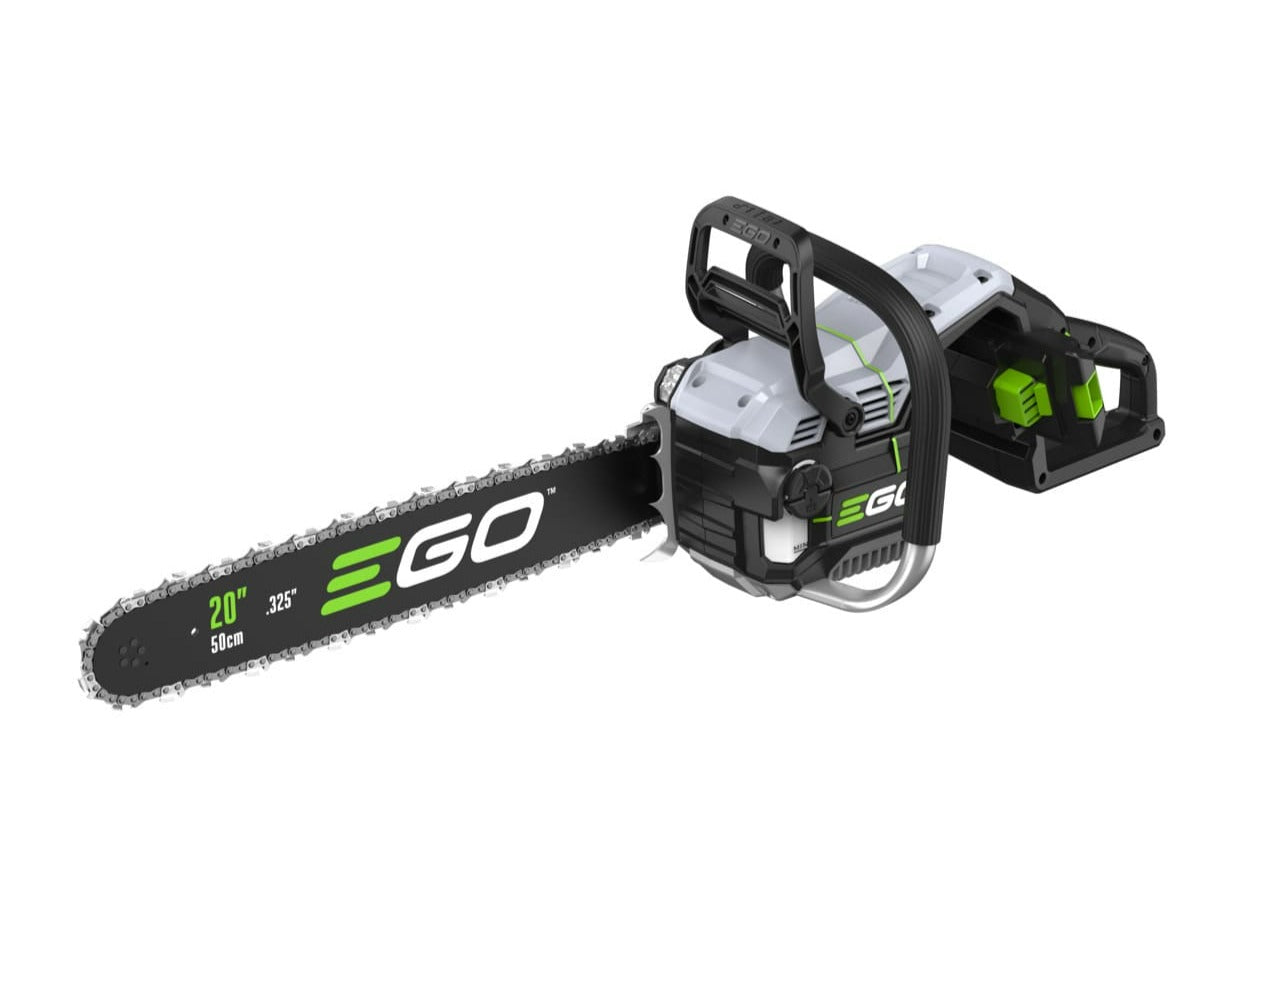 EGO CSX5000 chainsaw 50cm for professionals